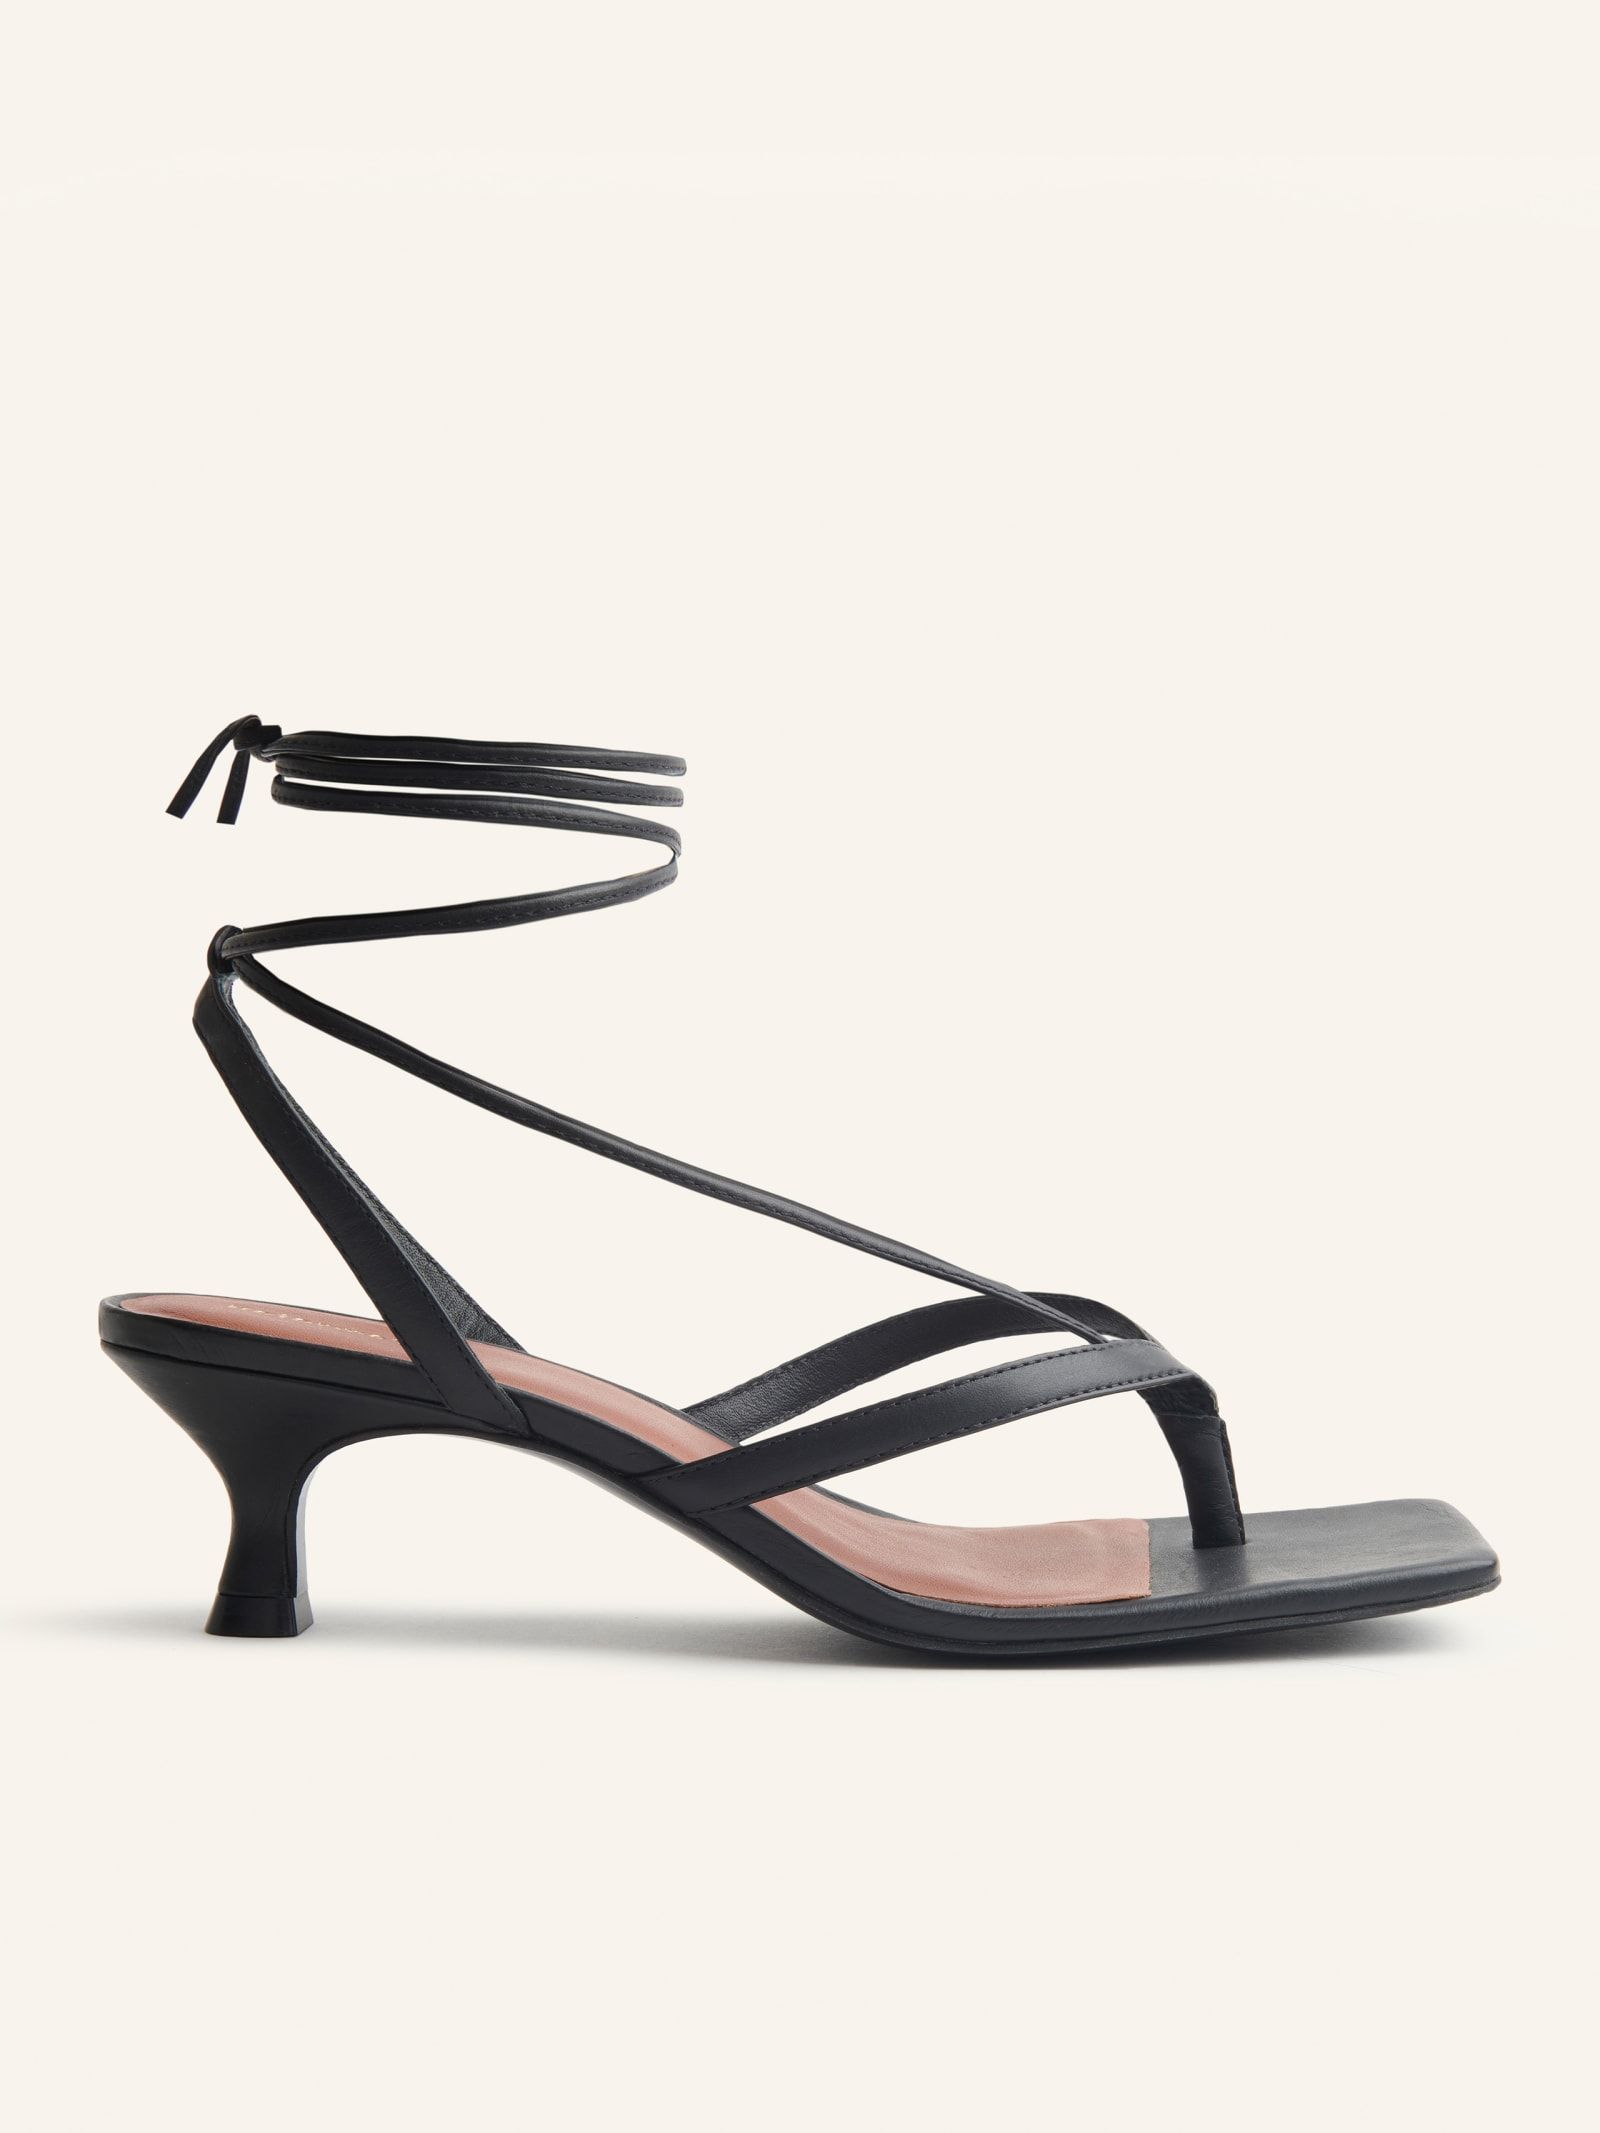 Reformation Just Launched New Shoes—Here Are the Top 5 Pairs | Who What ...